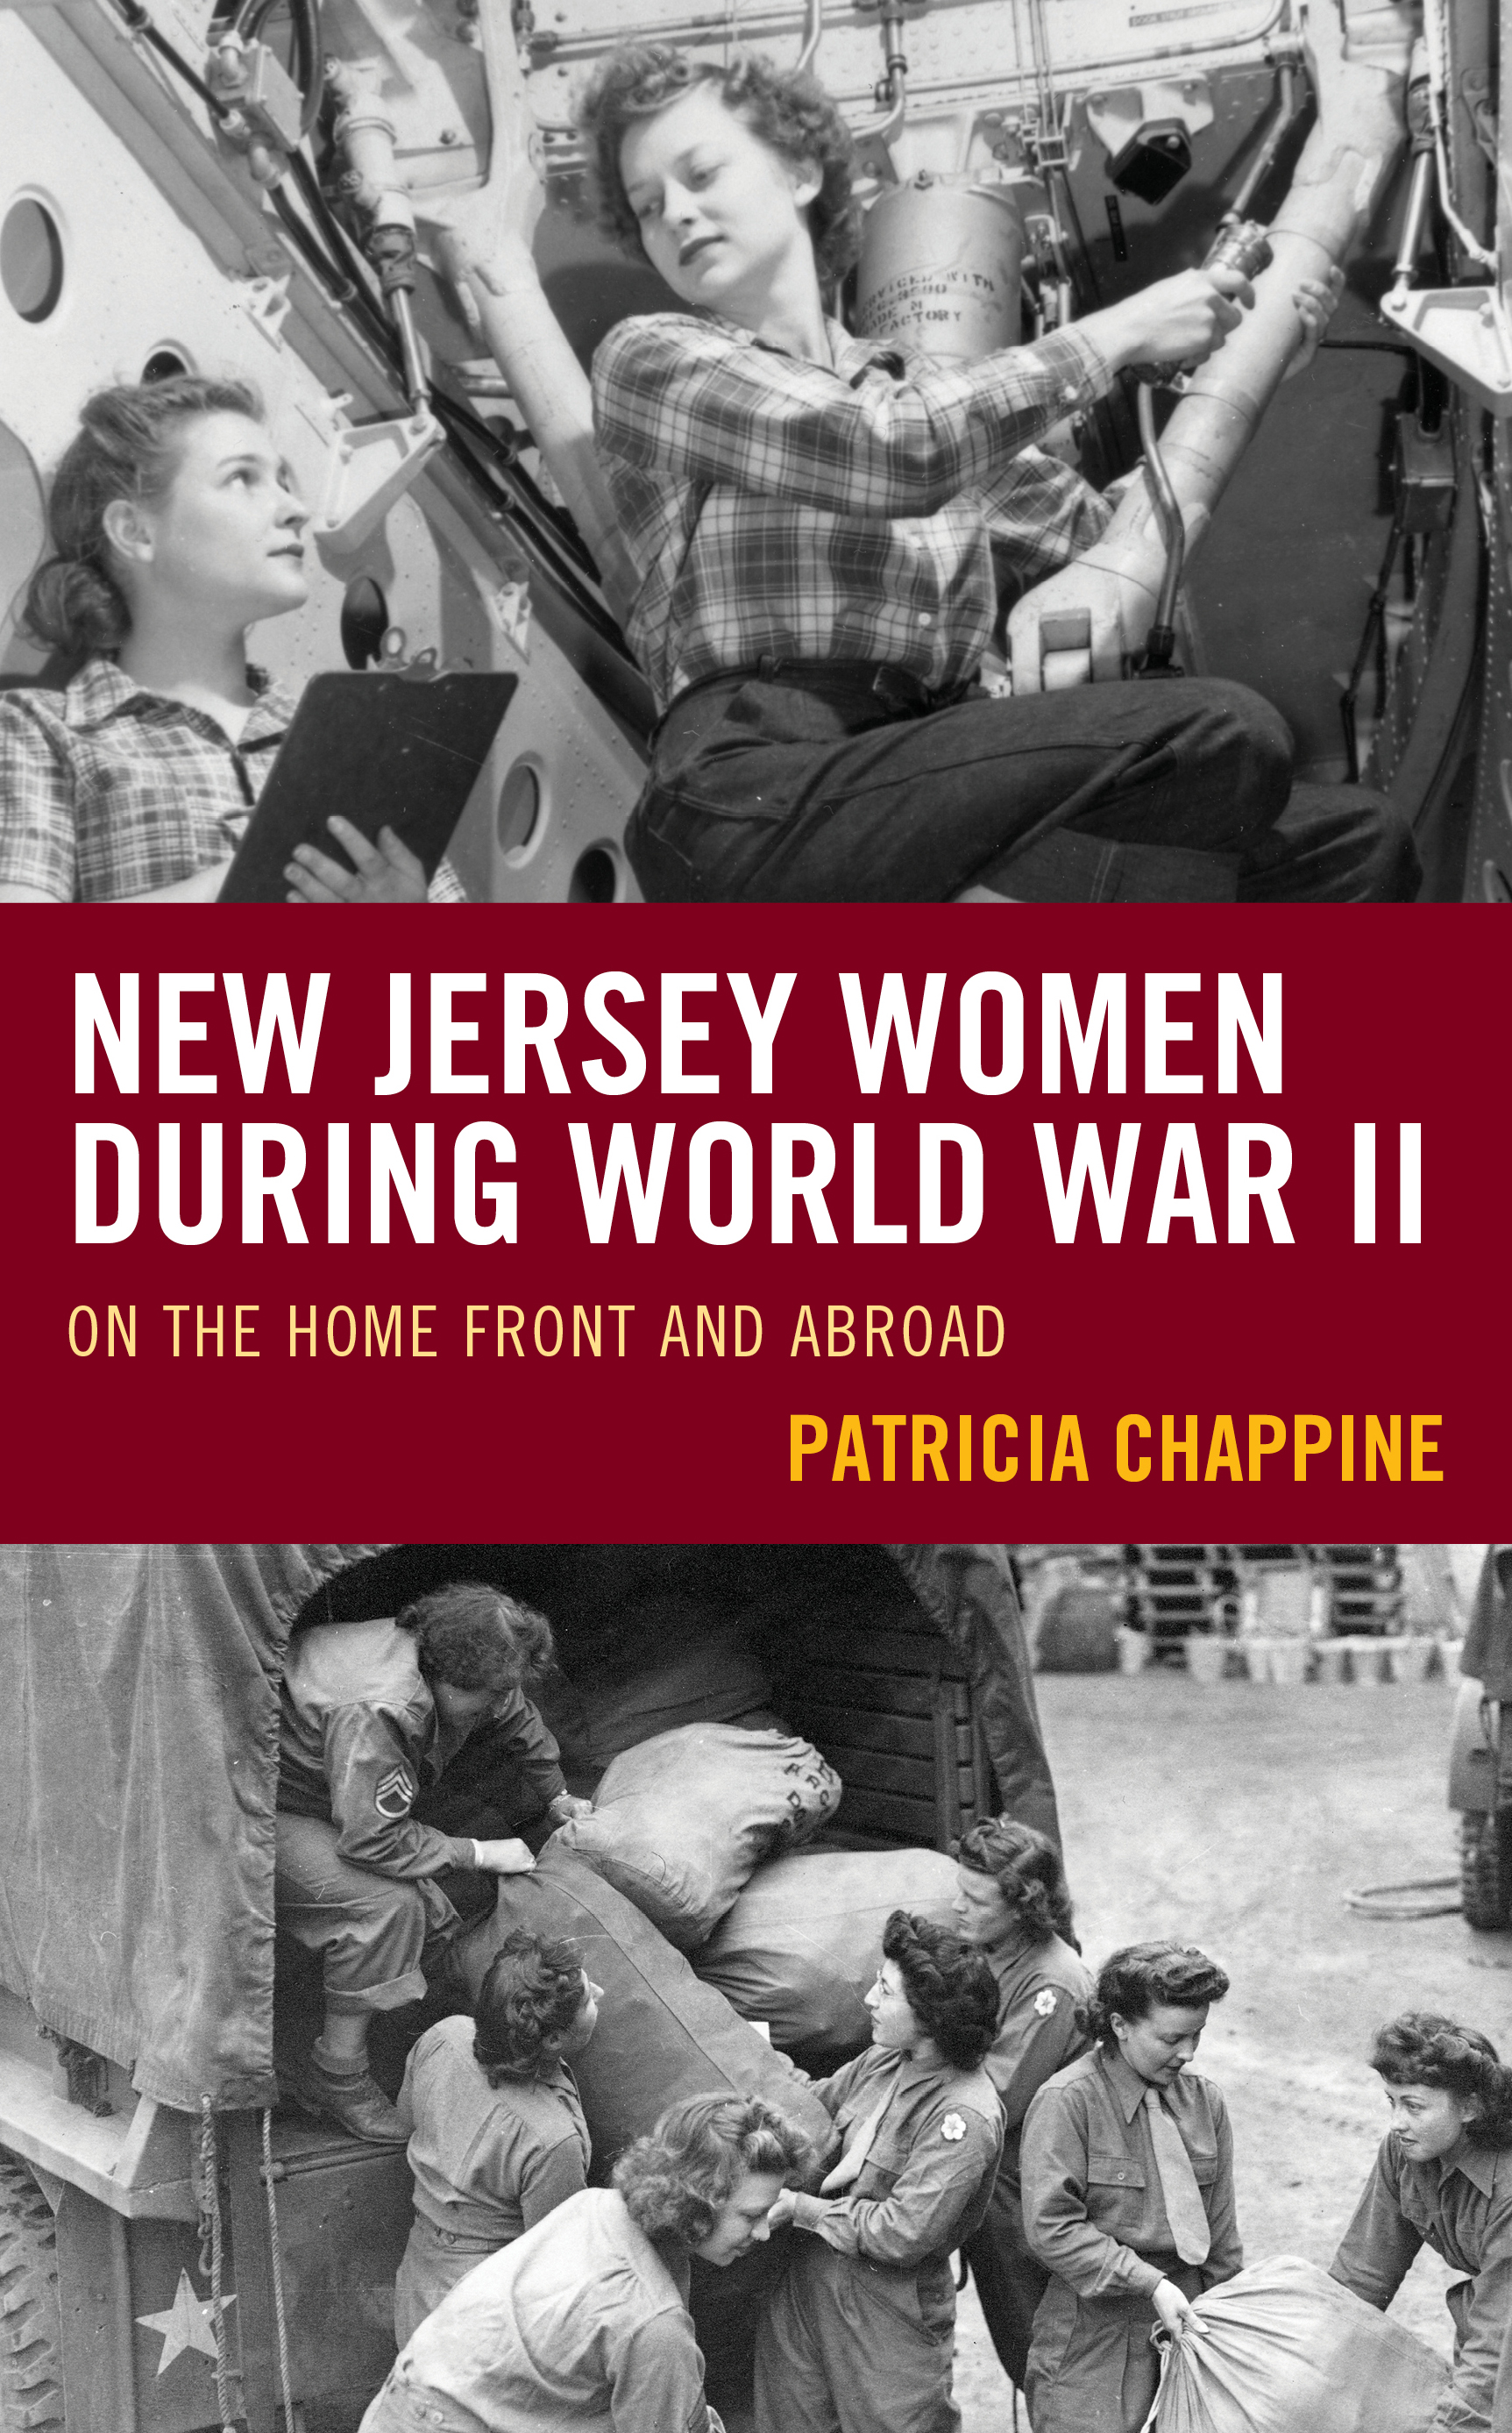 New Jersey Women during World War II: On the Home Front and Abroad